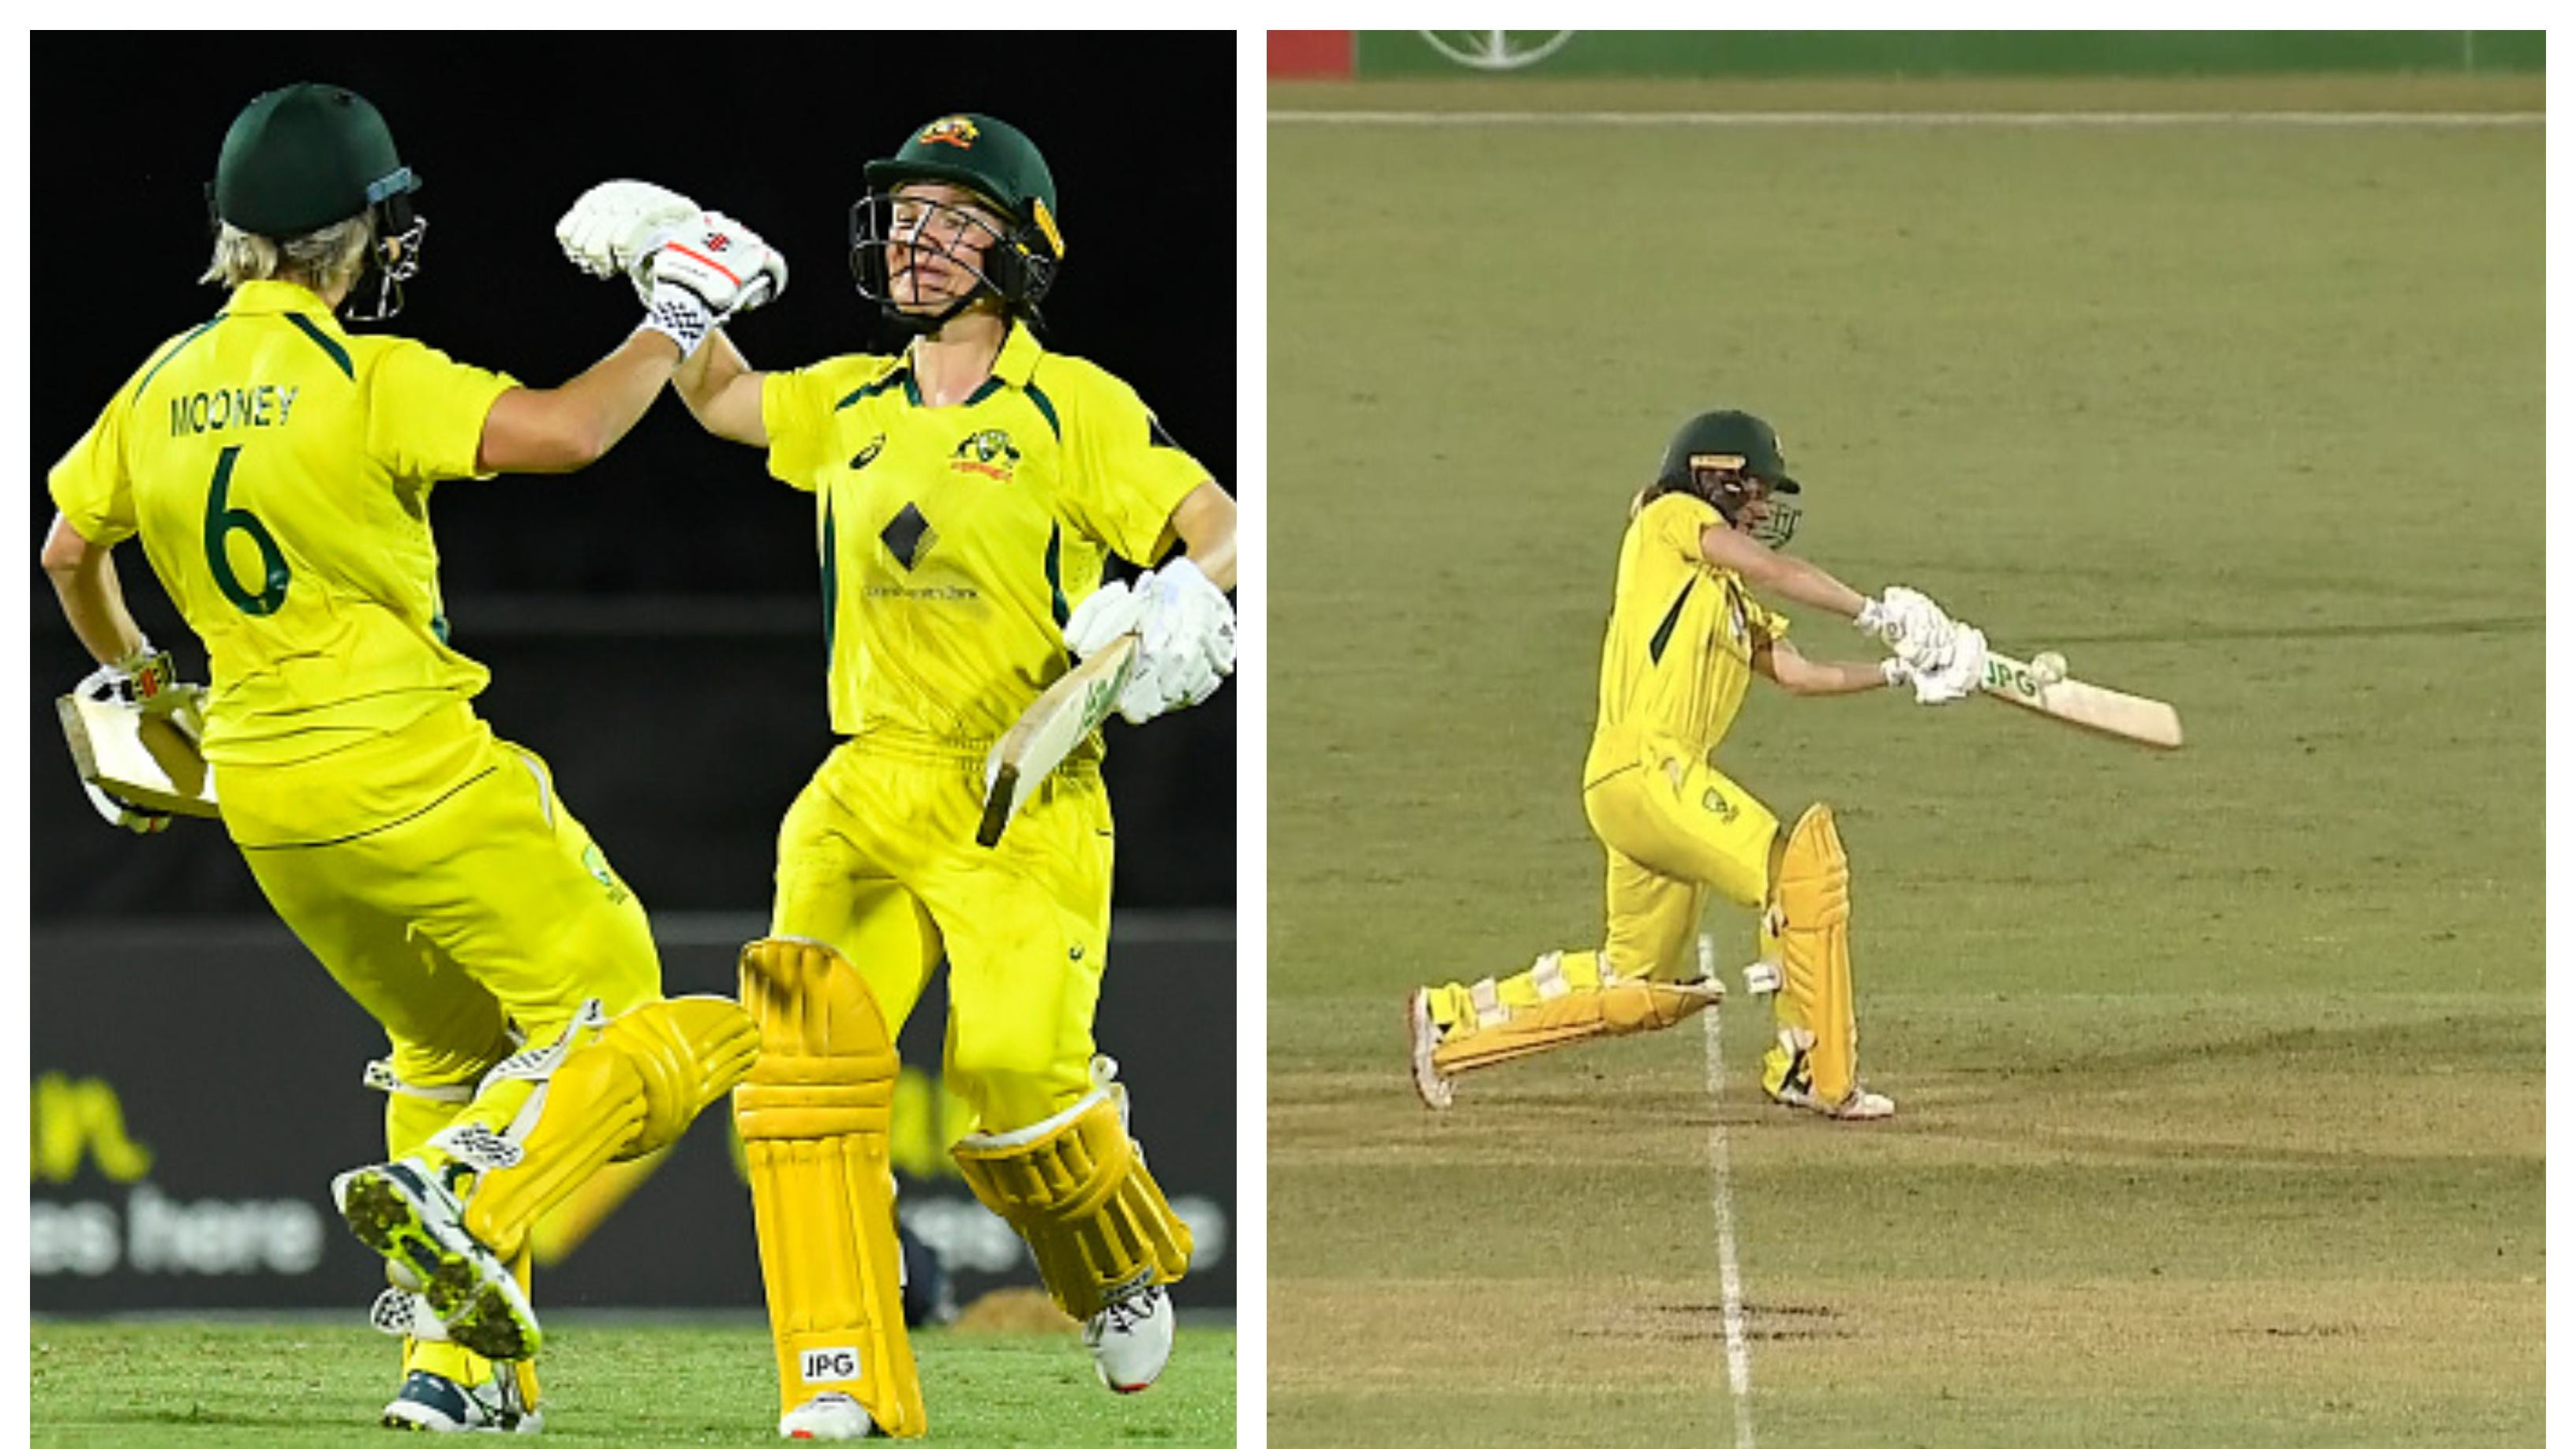 AUSW v INDW 2021: WATCH – Australia wins 2nd ODI on last delivery after 3rd umpire declares waist height no-ball